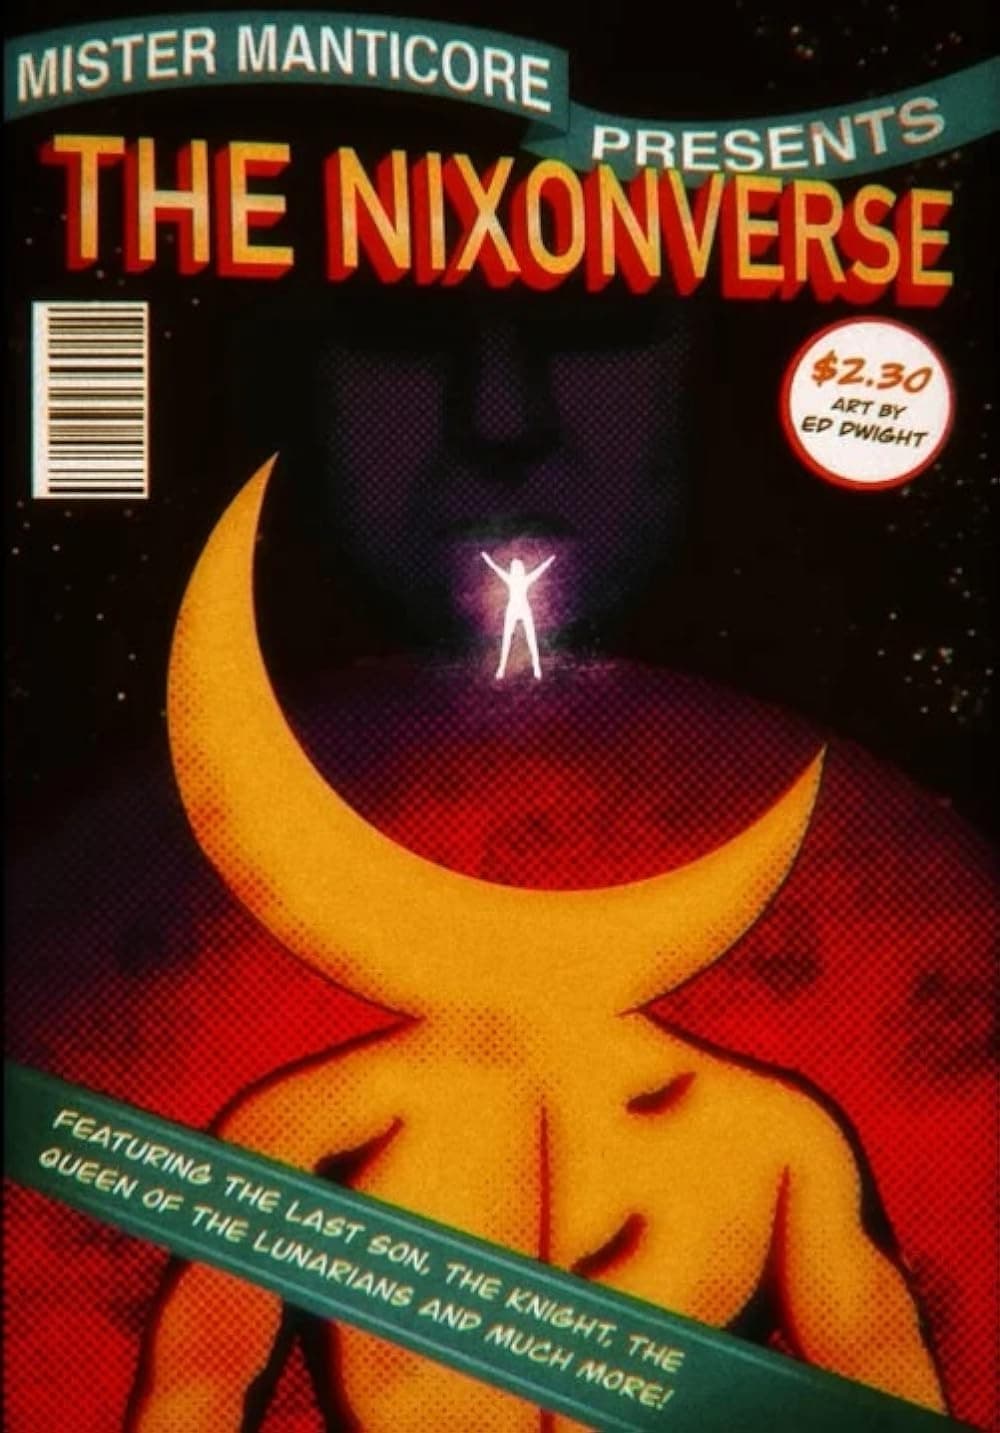 The Absolute Nixonverse